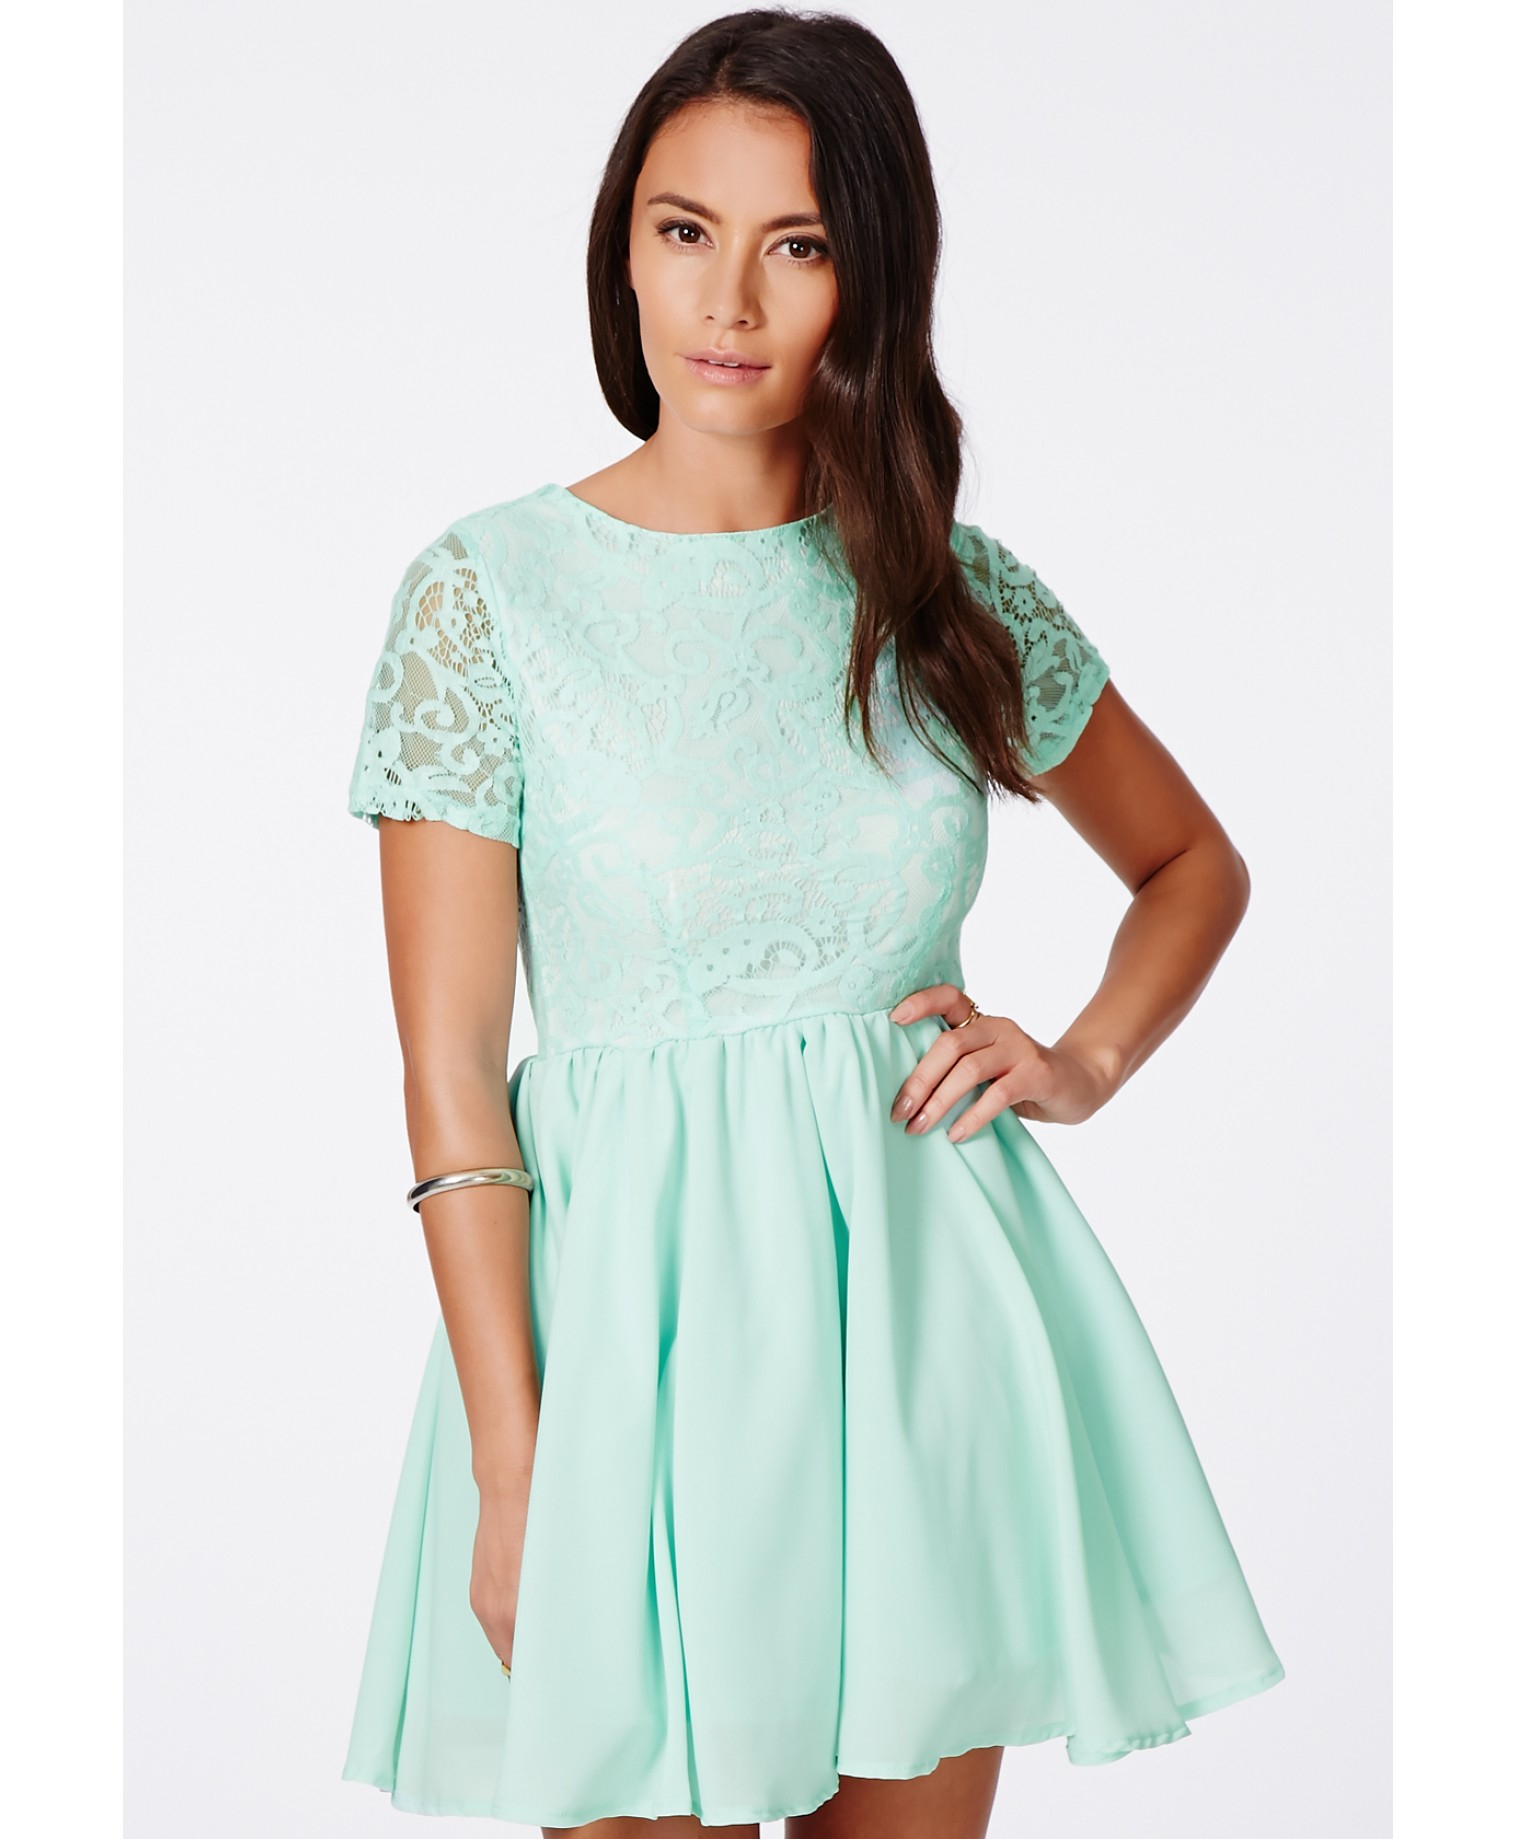 Missguided Sofitha Mint Lace Puffball Skater Dress in Green (mint) | Lyst